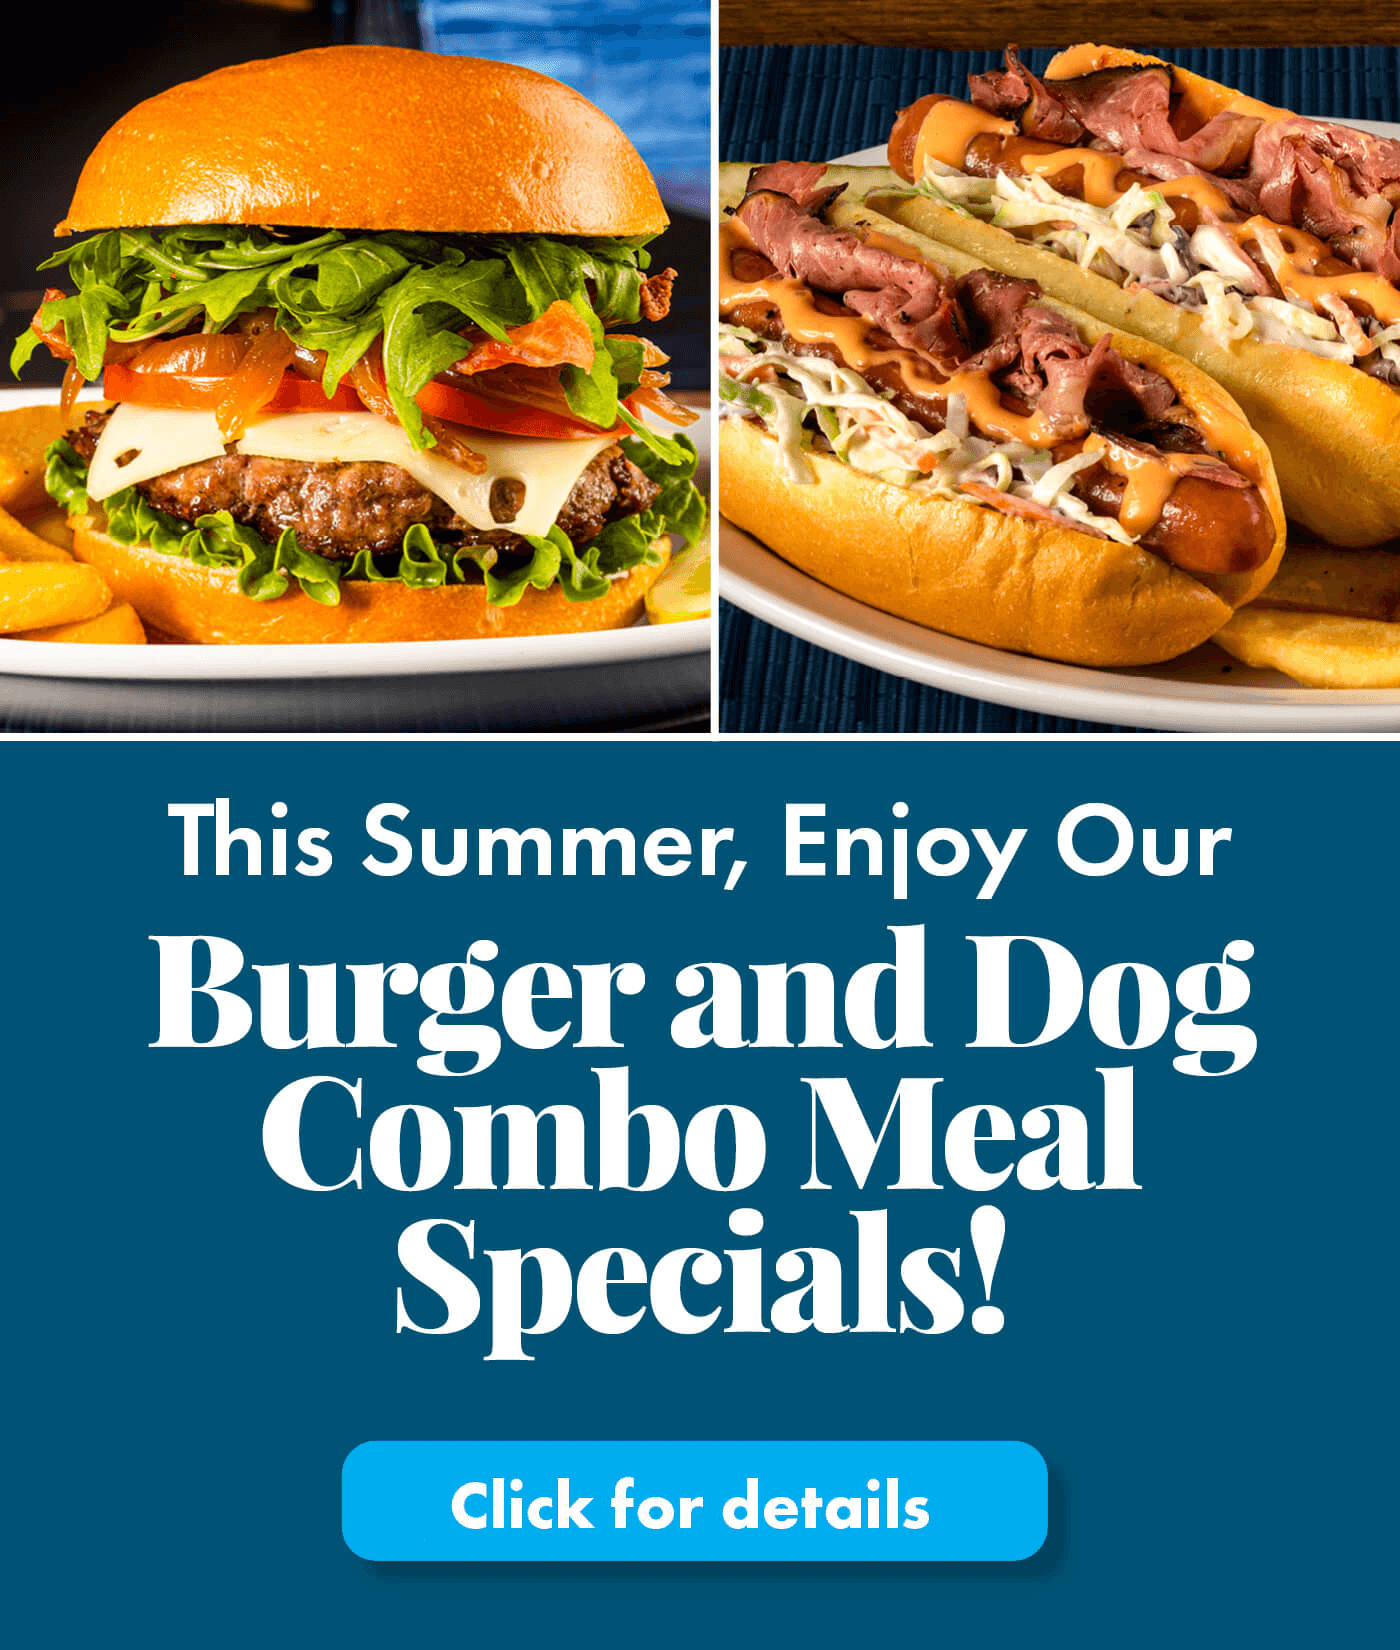 This summer enjoy our Burger and Dog Combo Meal Specials!